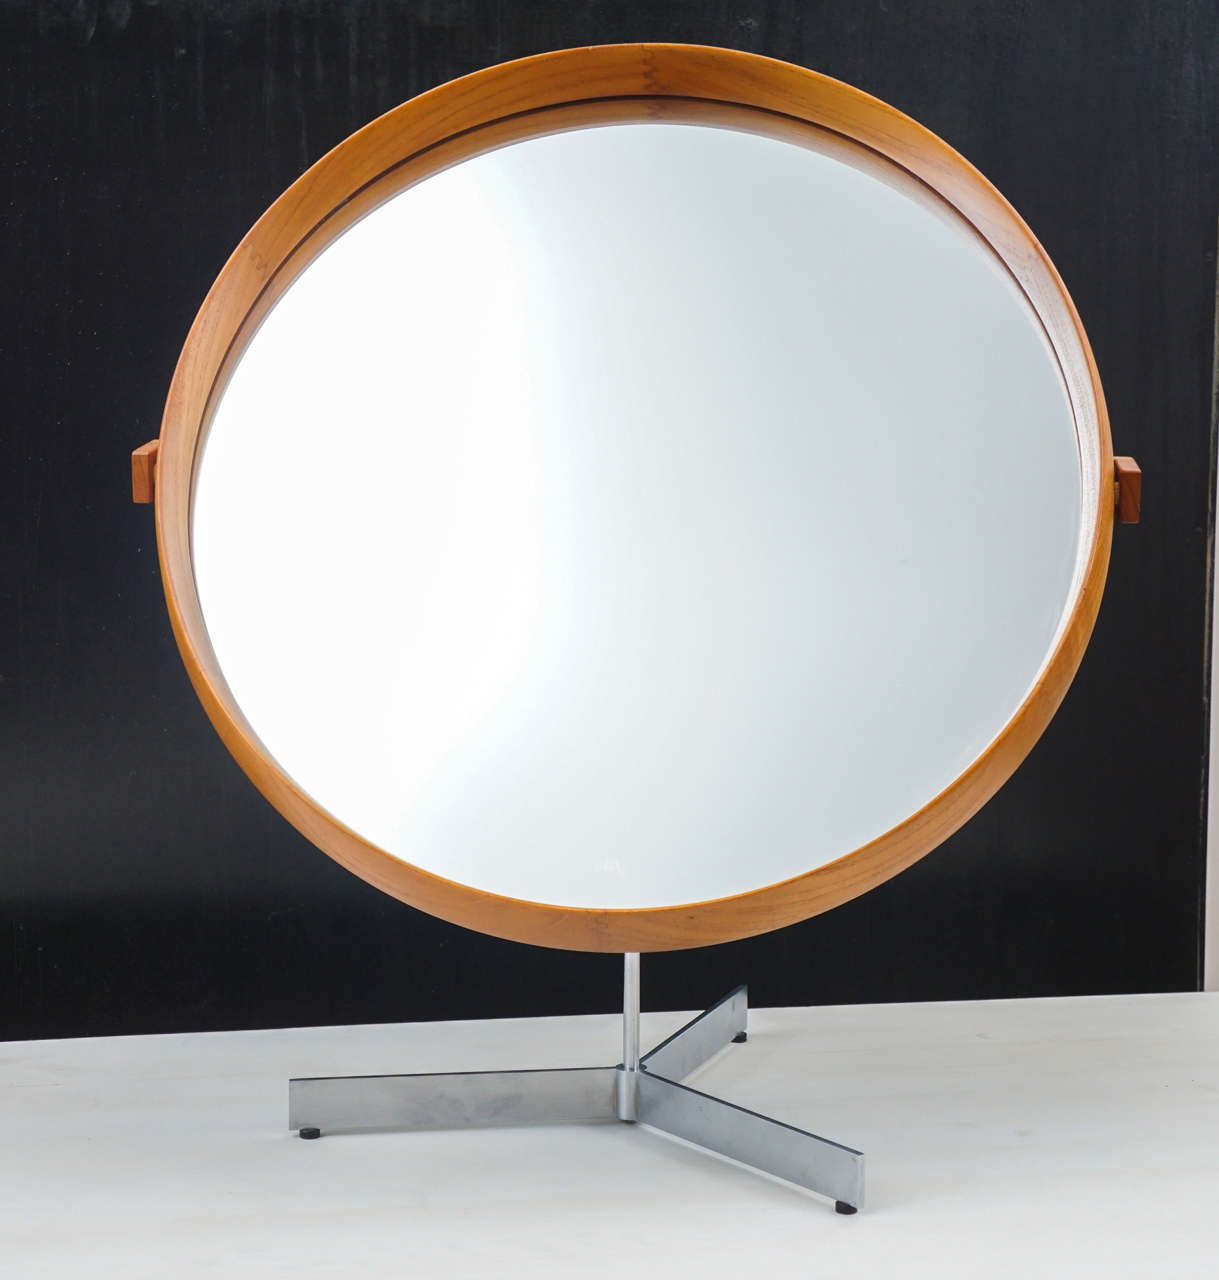 Large teak table mirror by Uno & Osten Kristiansson.
This handsome teak mirror, rotates and tilts on its brushed steel, tripod pedestal frame.